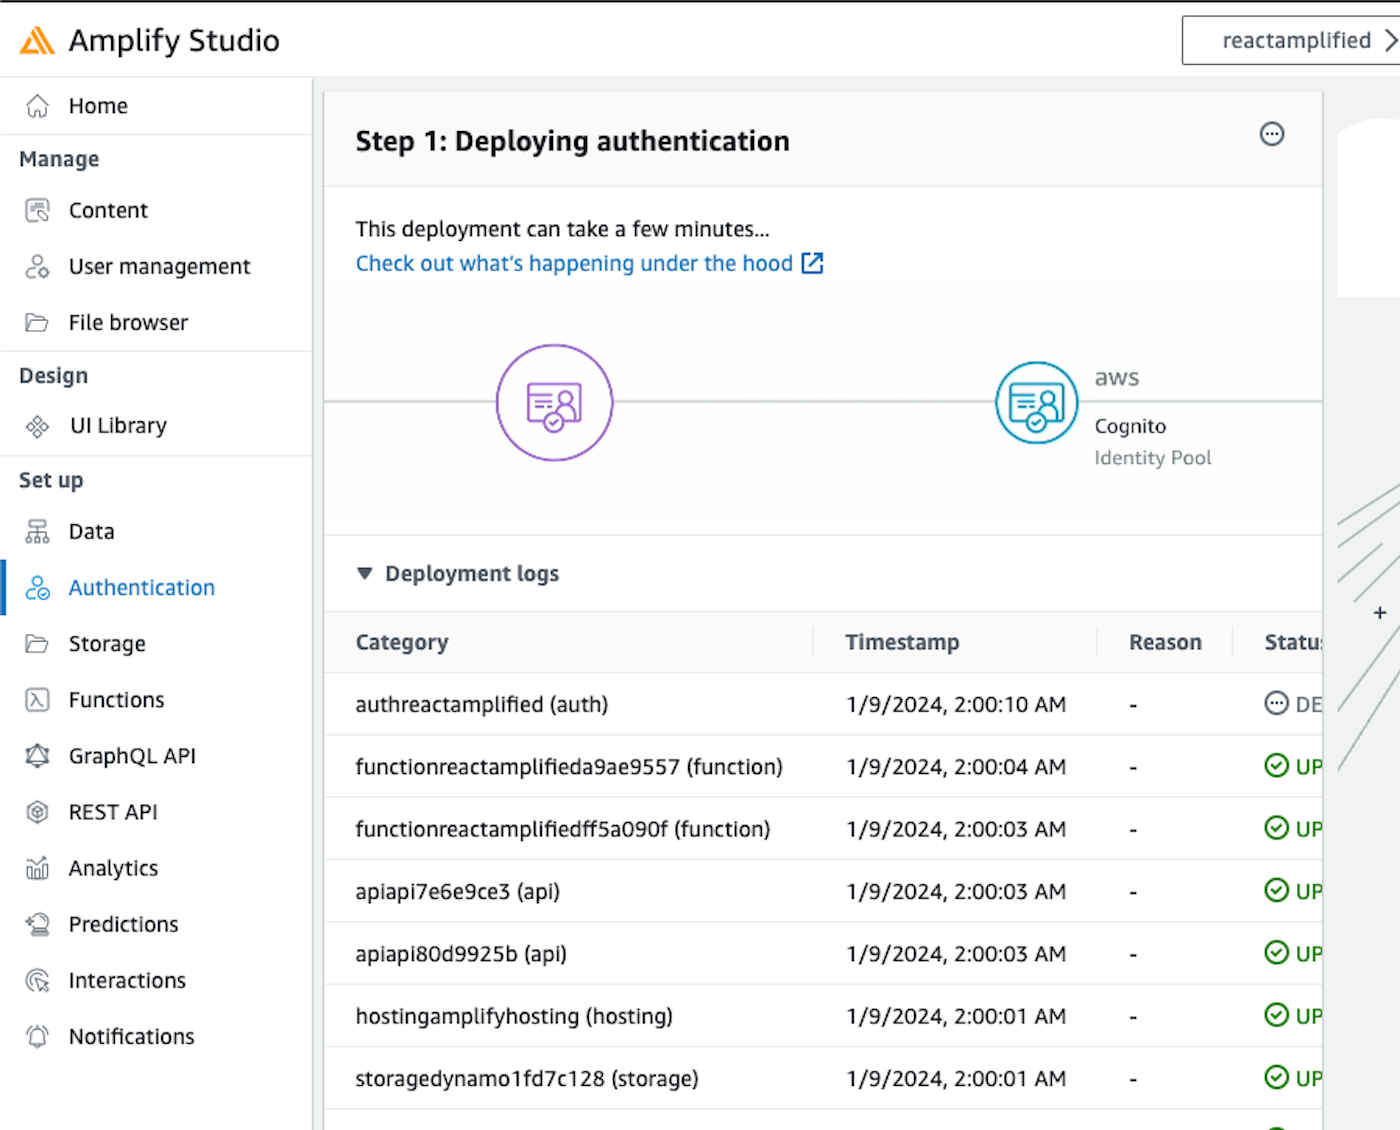 Adding the authentication component from Amplify Studio